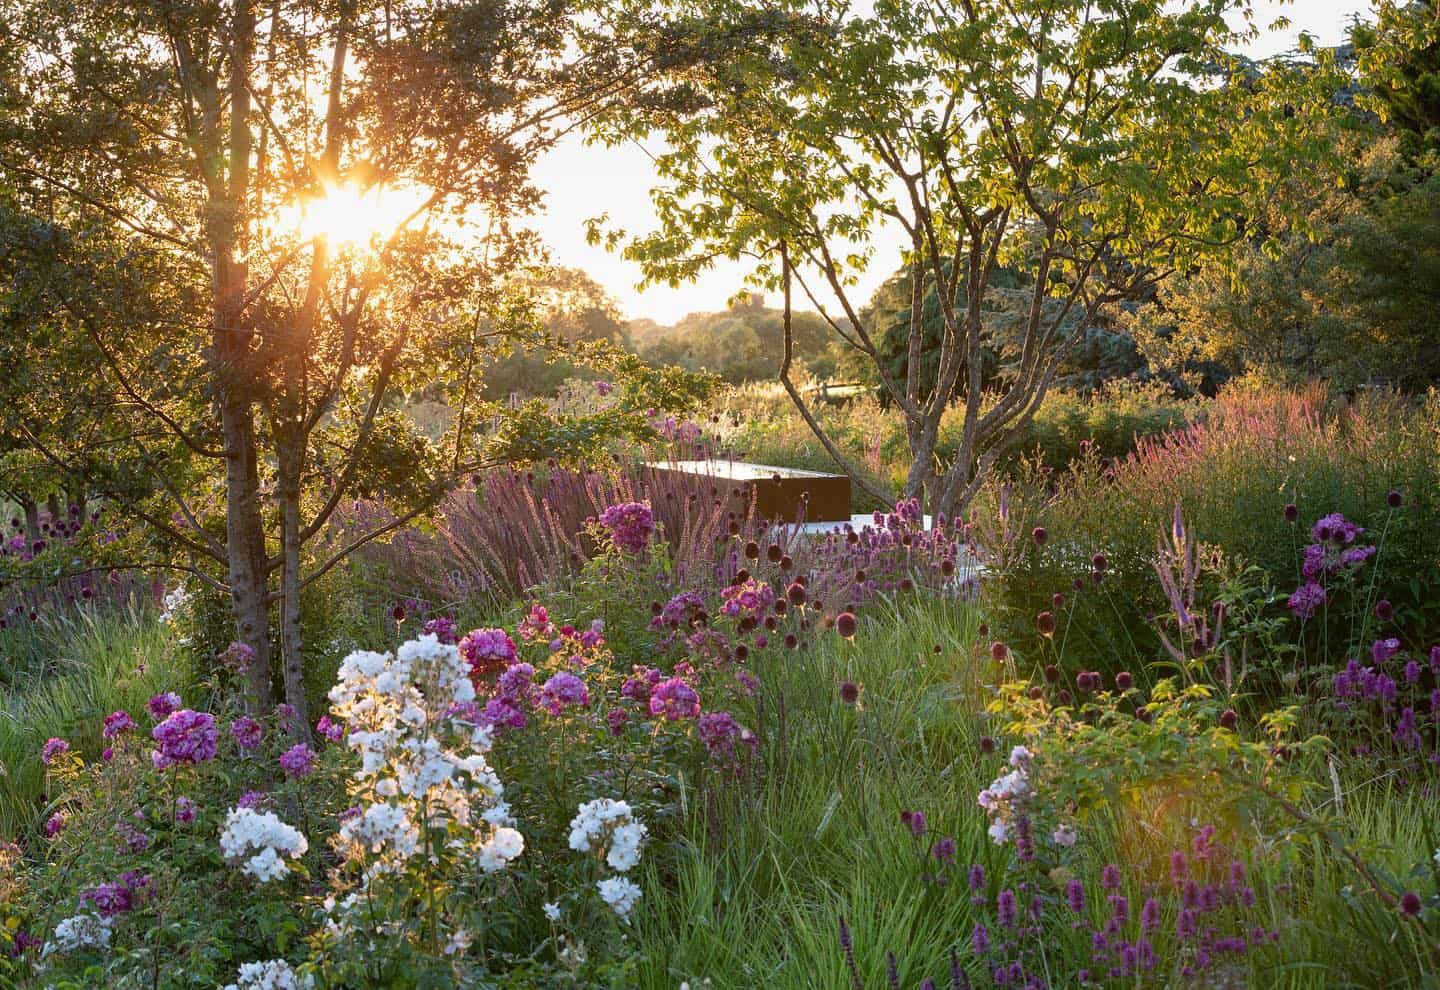 Sunset illuminates a lush garden designed for the senses, with colorful flowers and a small pond, creating a serene, natural landscape.